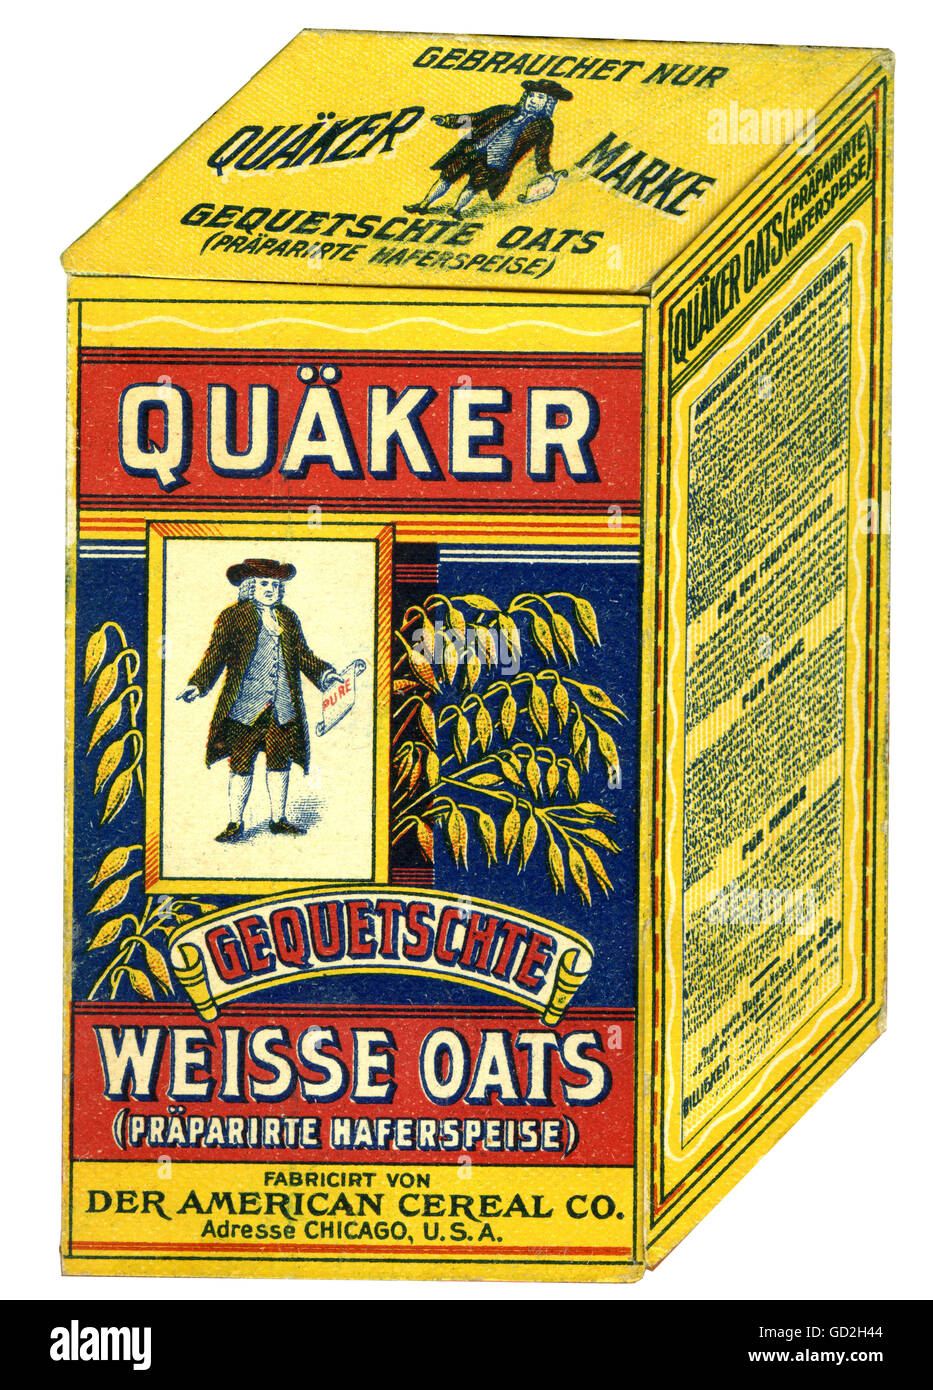 https://c8.alamy.com/comp/GD2H44/advertising-food-very-early-advertising-for-oat-flakes-label-quaeker-GD2H44.jpg